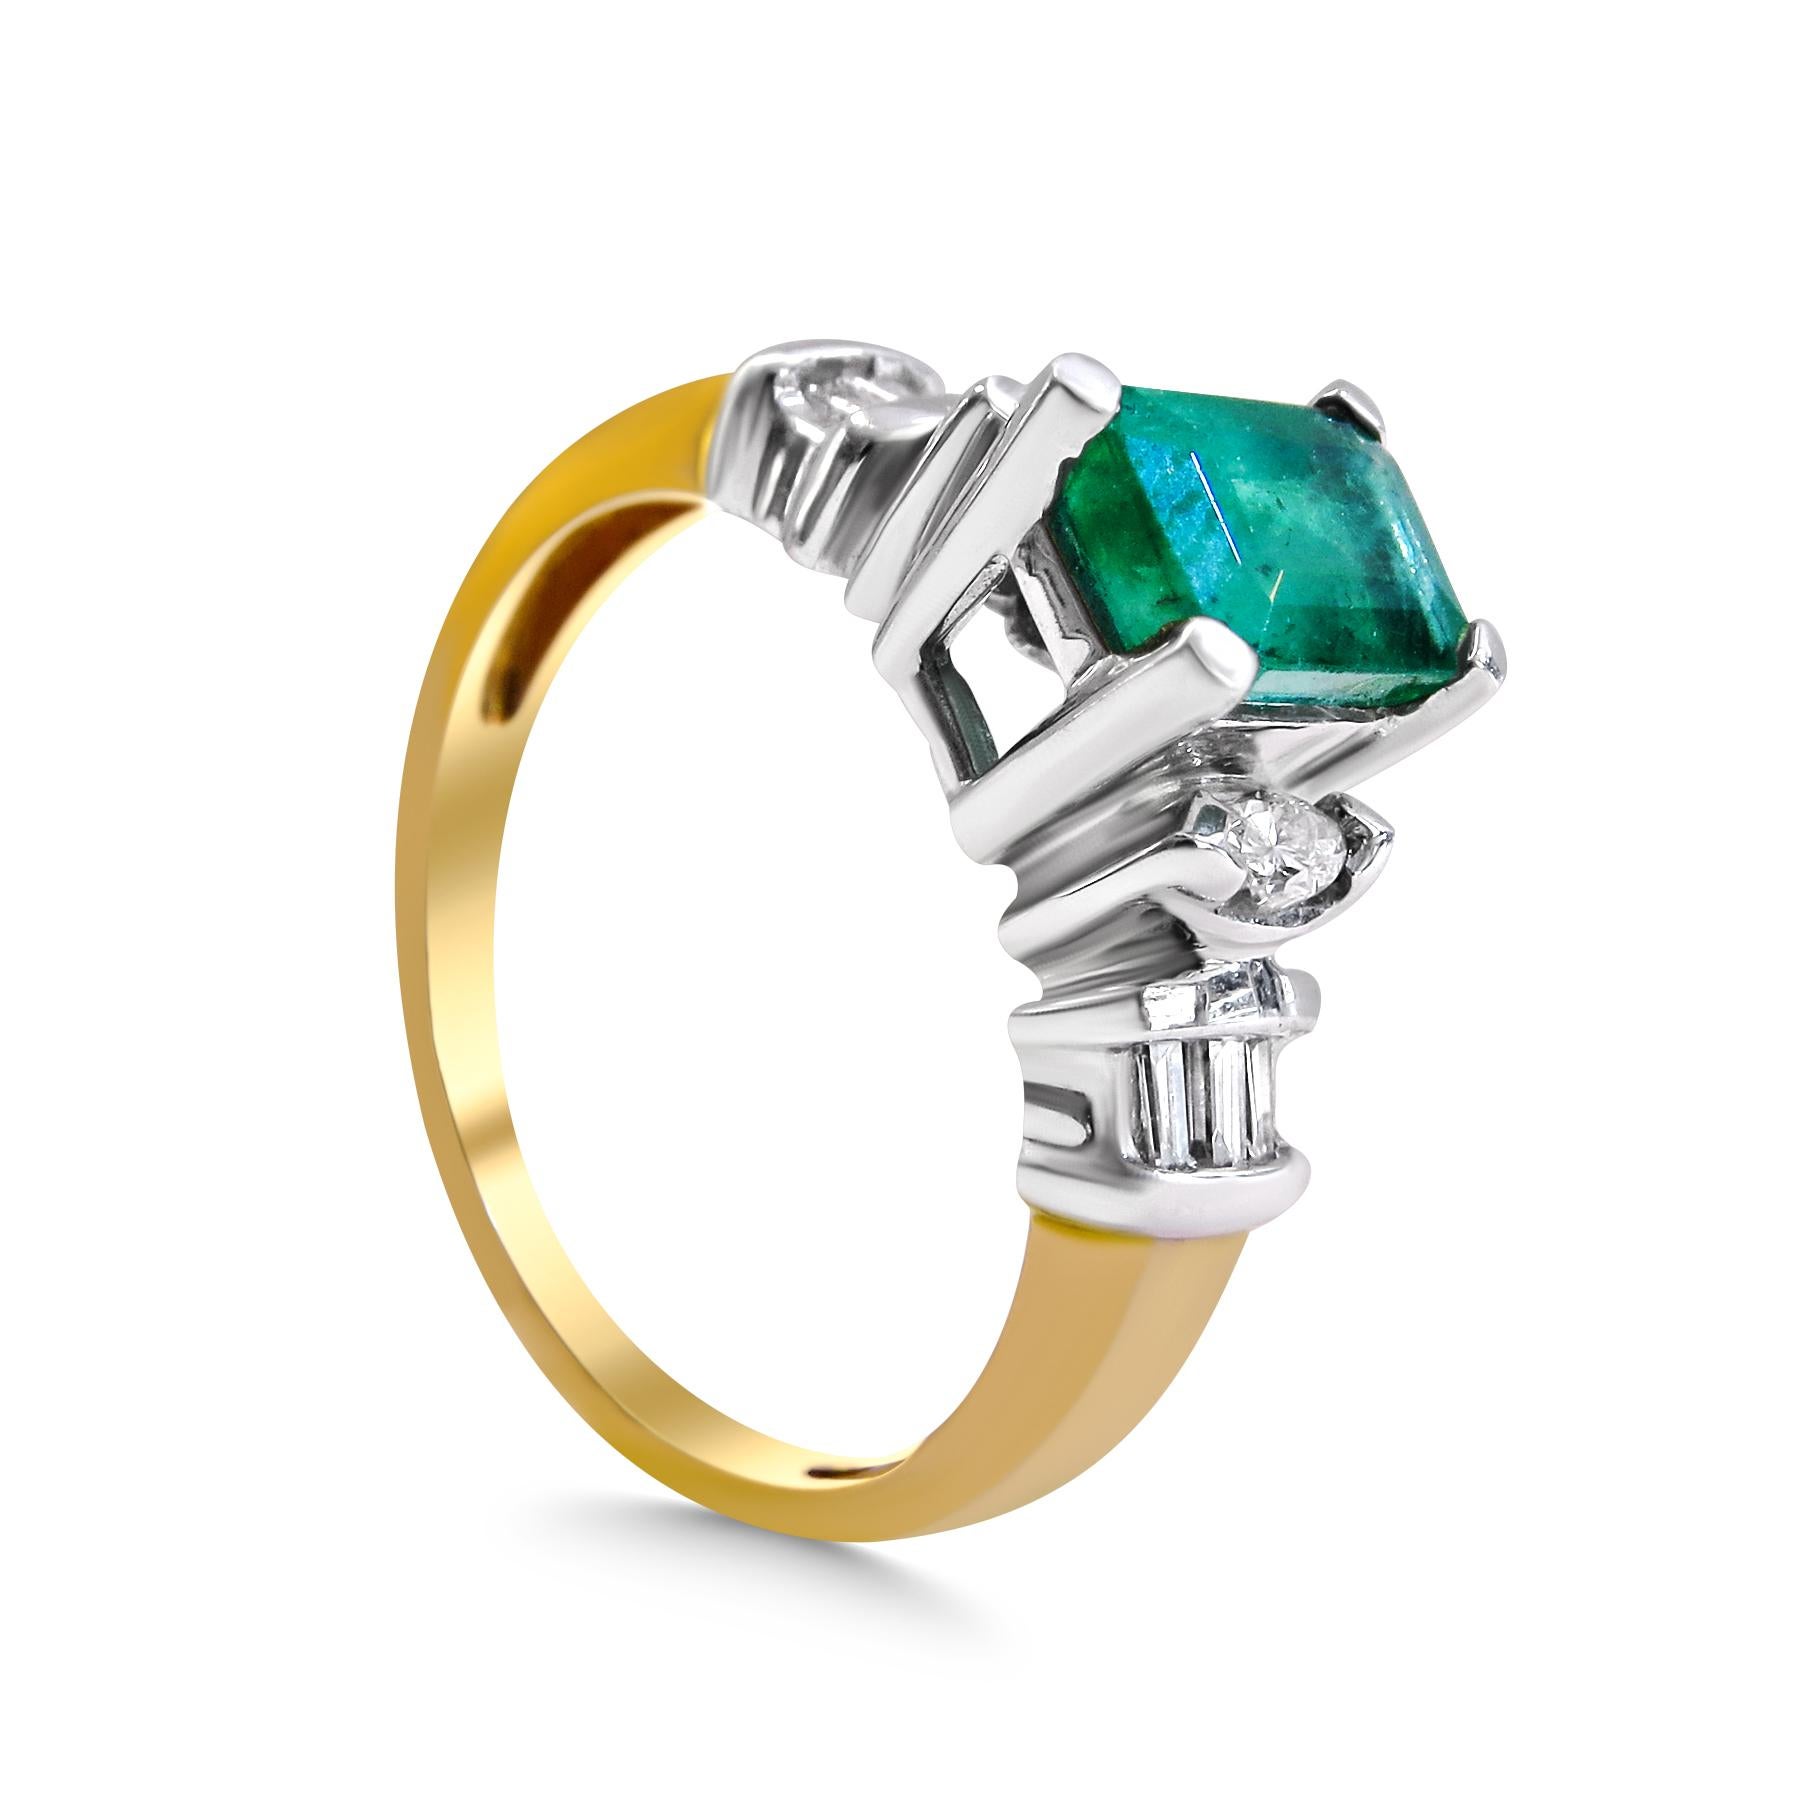 14k Yellow and white gold
Size= 5 
Colombian Emerald= 1.5 ct total=  7mm x 5mm
Diamond 1 = 2 marquise shape 2.20 ct total
Diamond 2= 8 bugget shape 0.20 ct total 
Weight= 3.3gr 